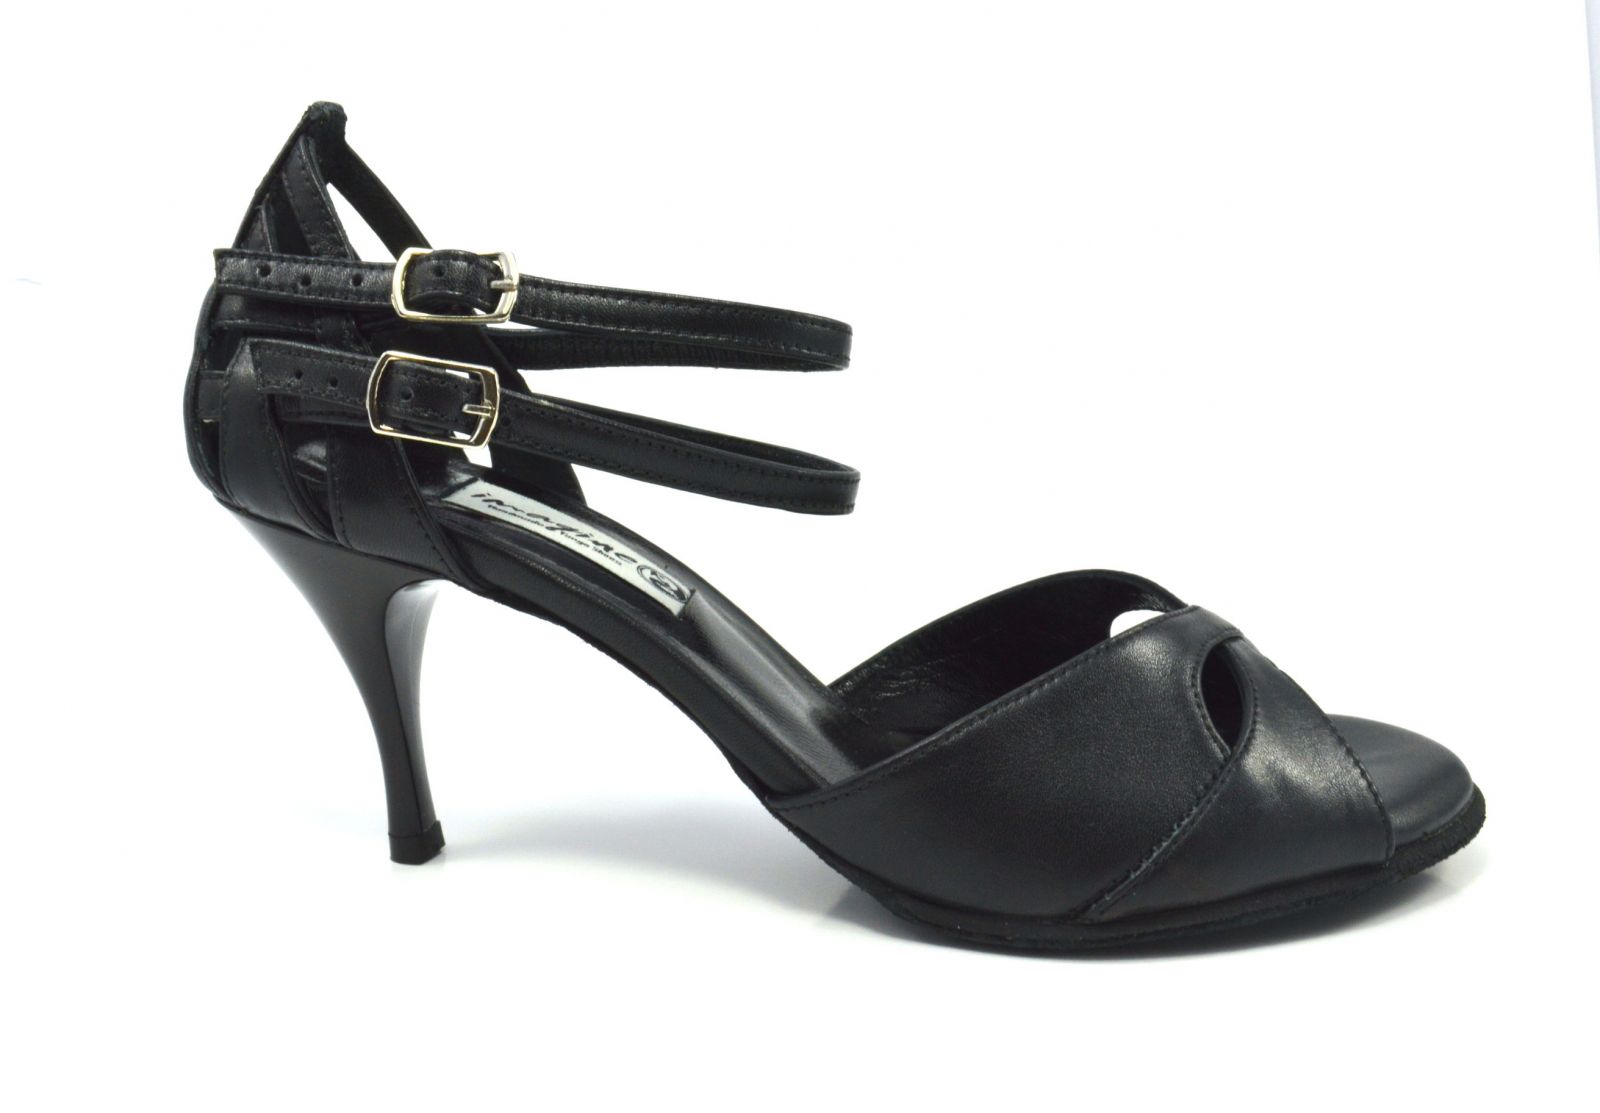 Women Argentine Tango Dance Shoes, peep toe style, in black soft leather